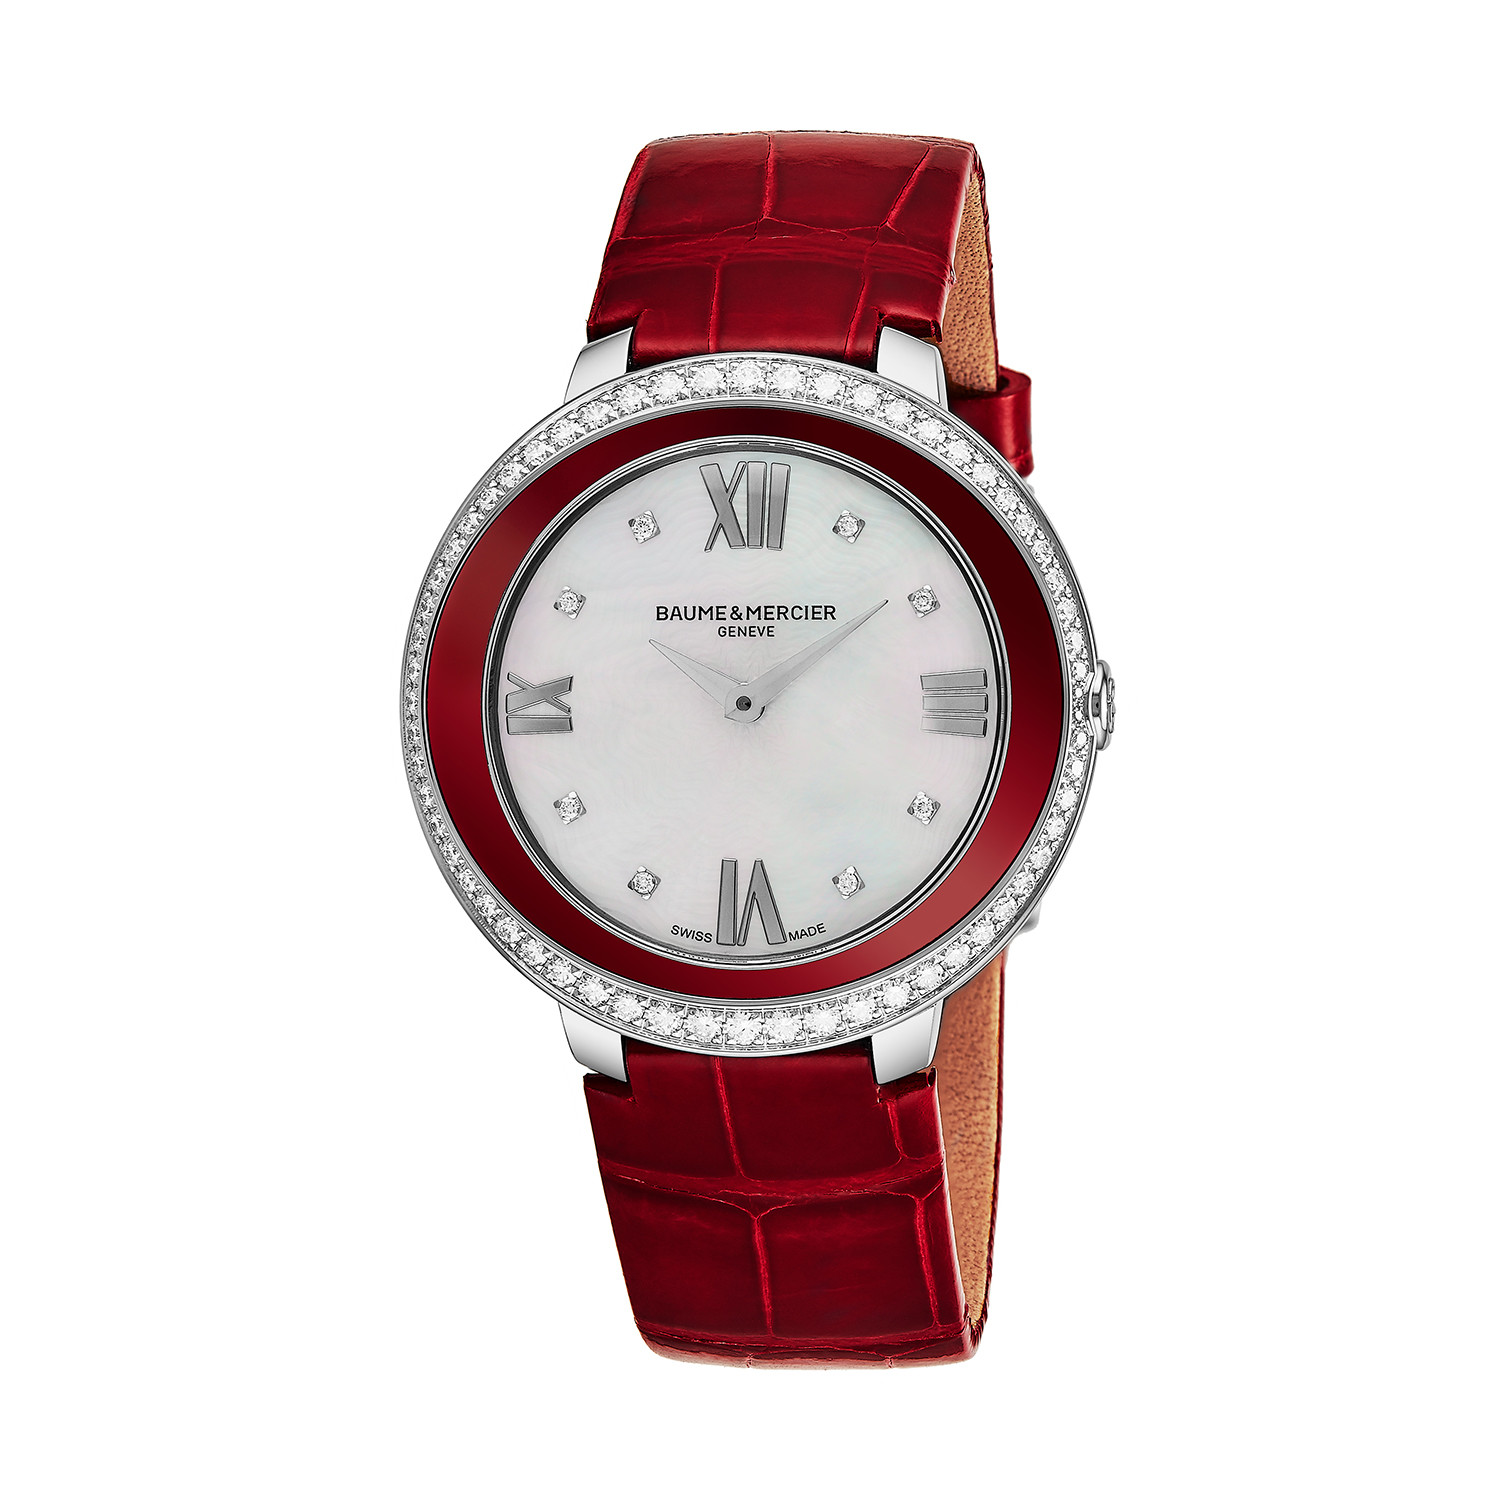 Promesse 30mm in Steel with Diamond Bezel on Red Alligator Leather Strap with Mother of Pearl Dial